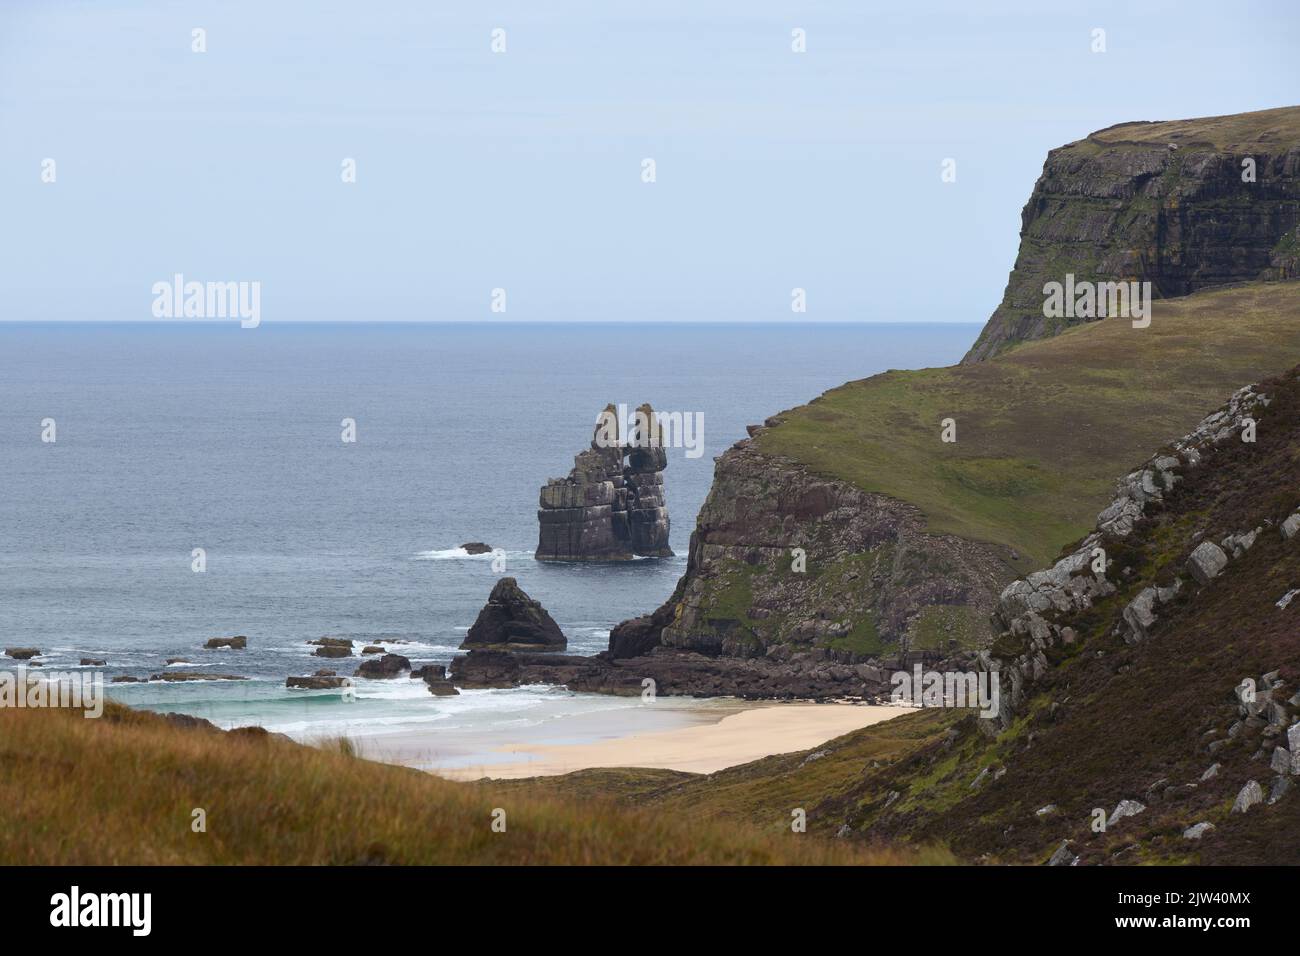 Sea stack, Kearvaig Bay, Stac Clo Kearvaig also known as the Cathedral on the northern coast of Scotland, UK Stock Photo